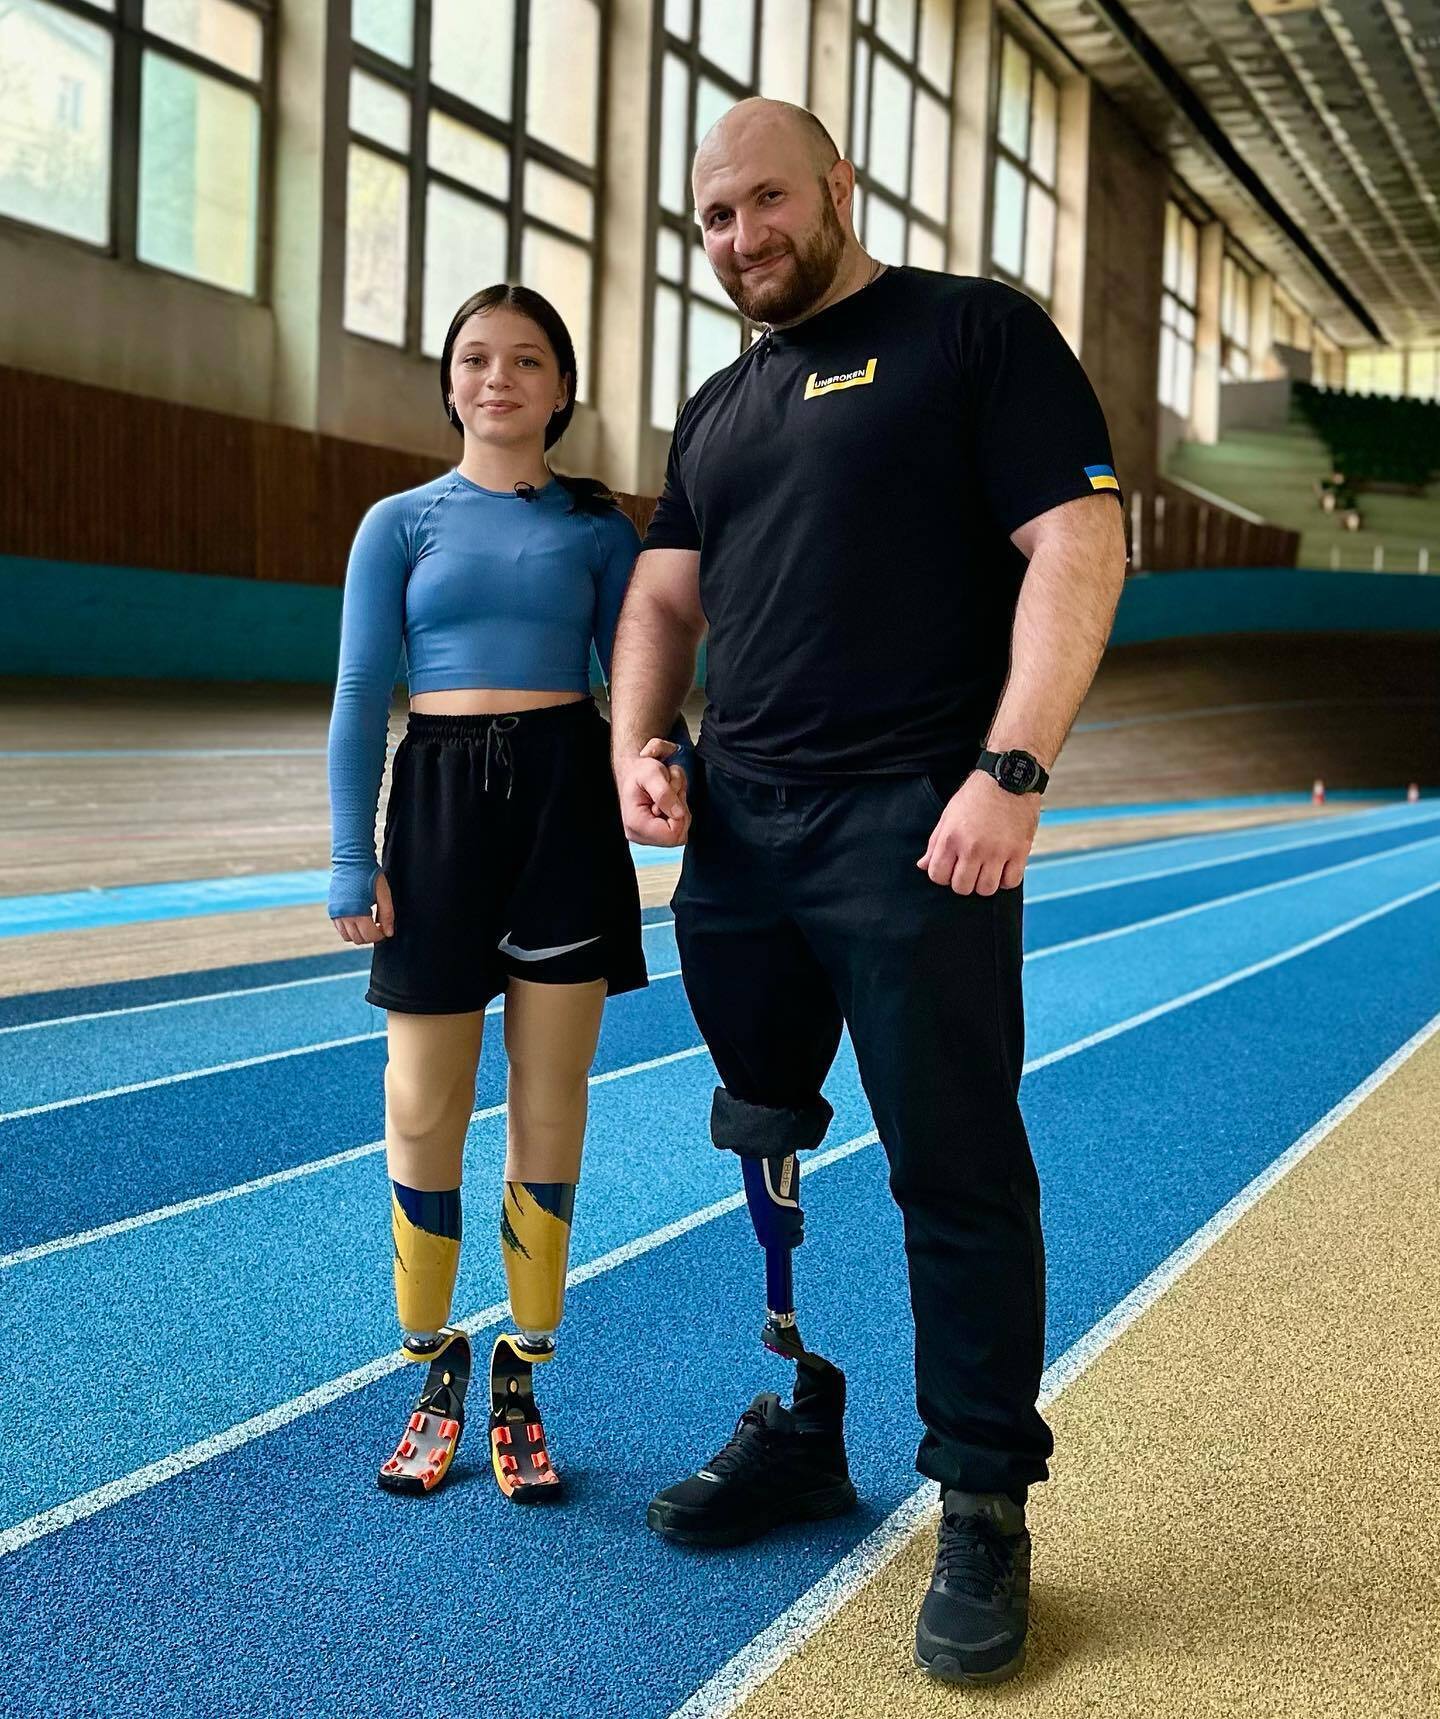 A Ukrainian woman who lost both her legs in a Russian missile attack ran the Boston Marathon on prostheses. Video